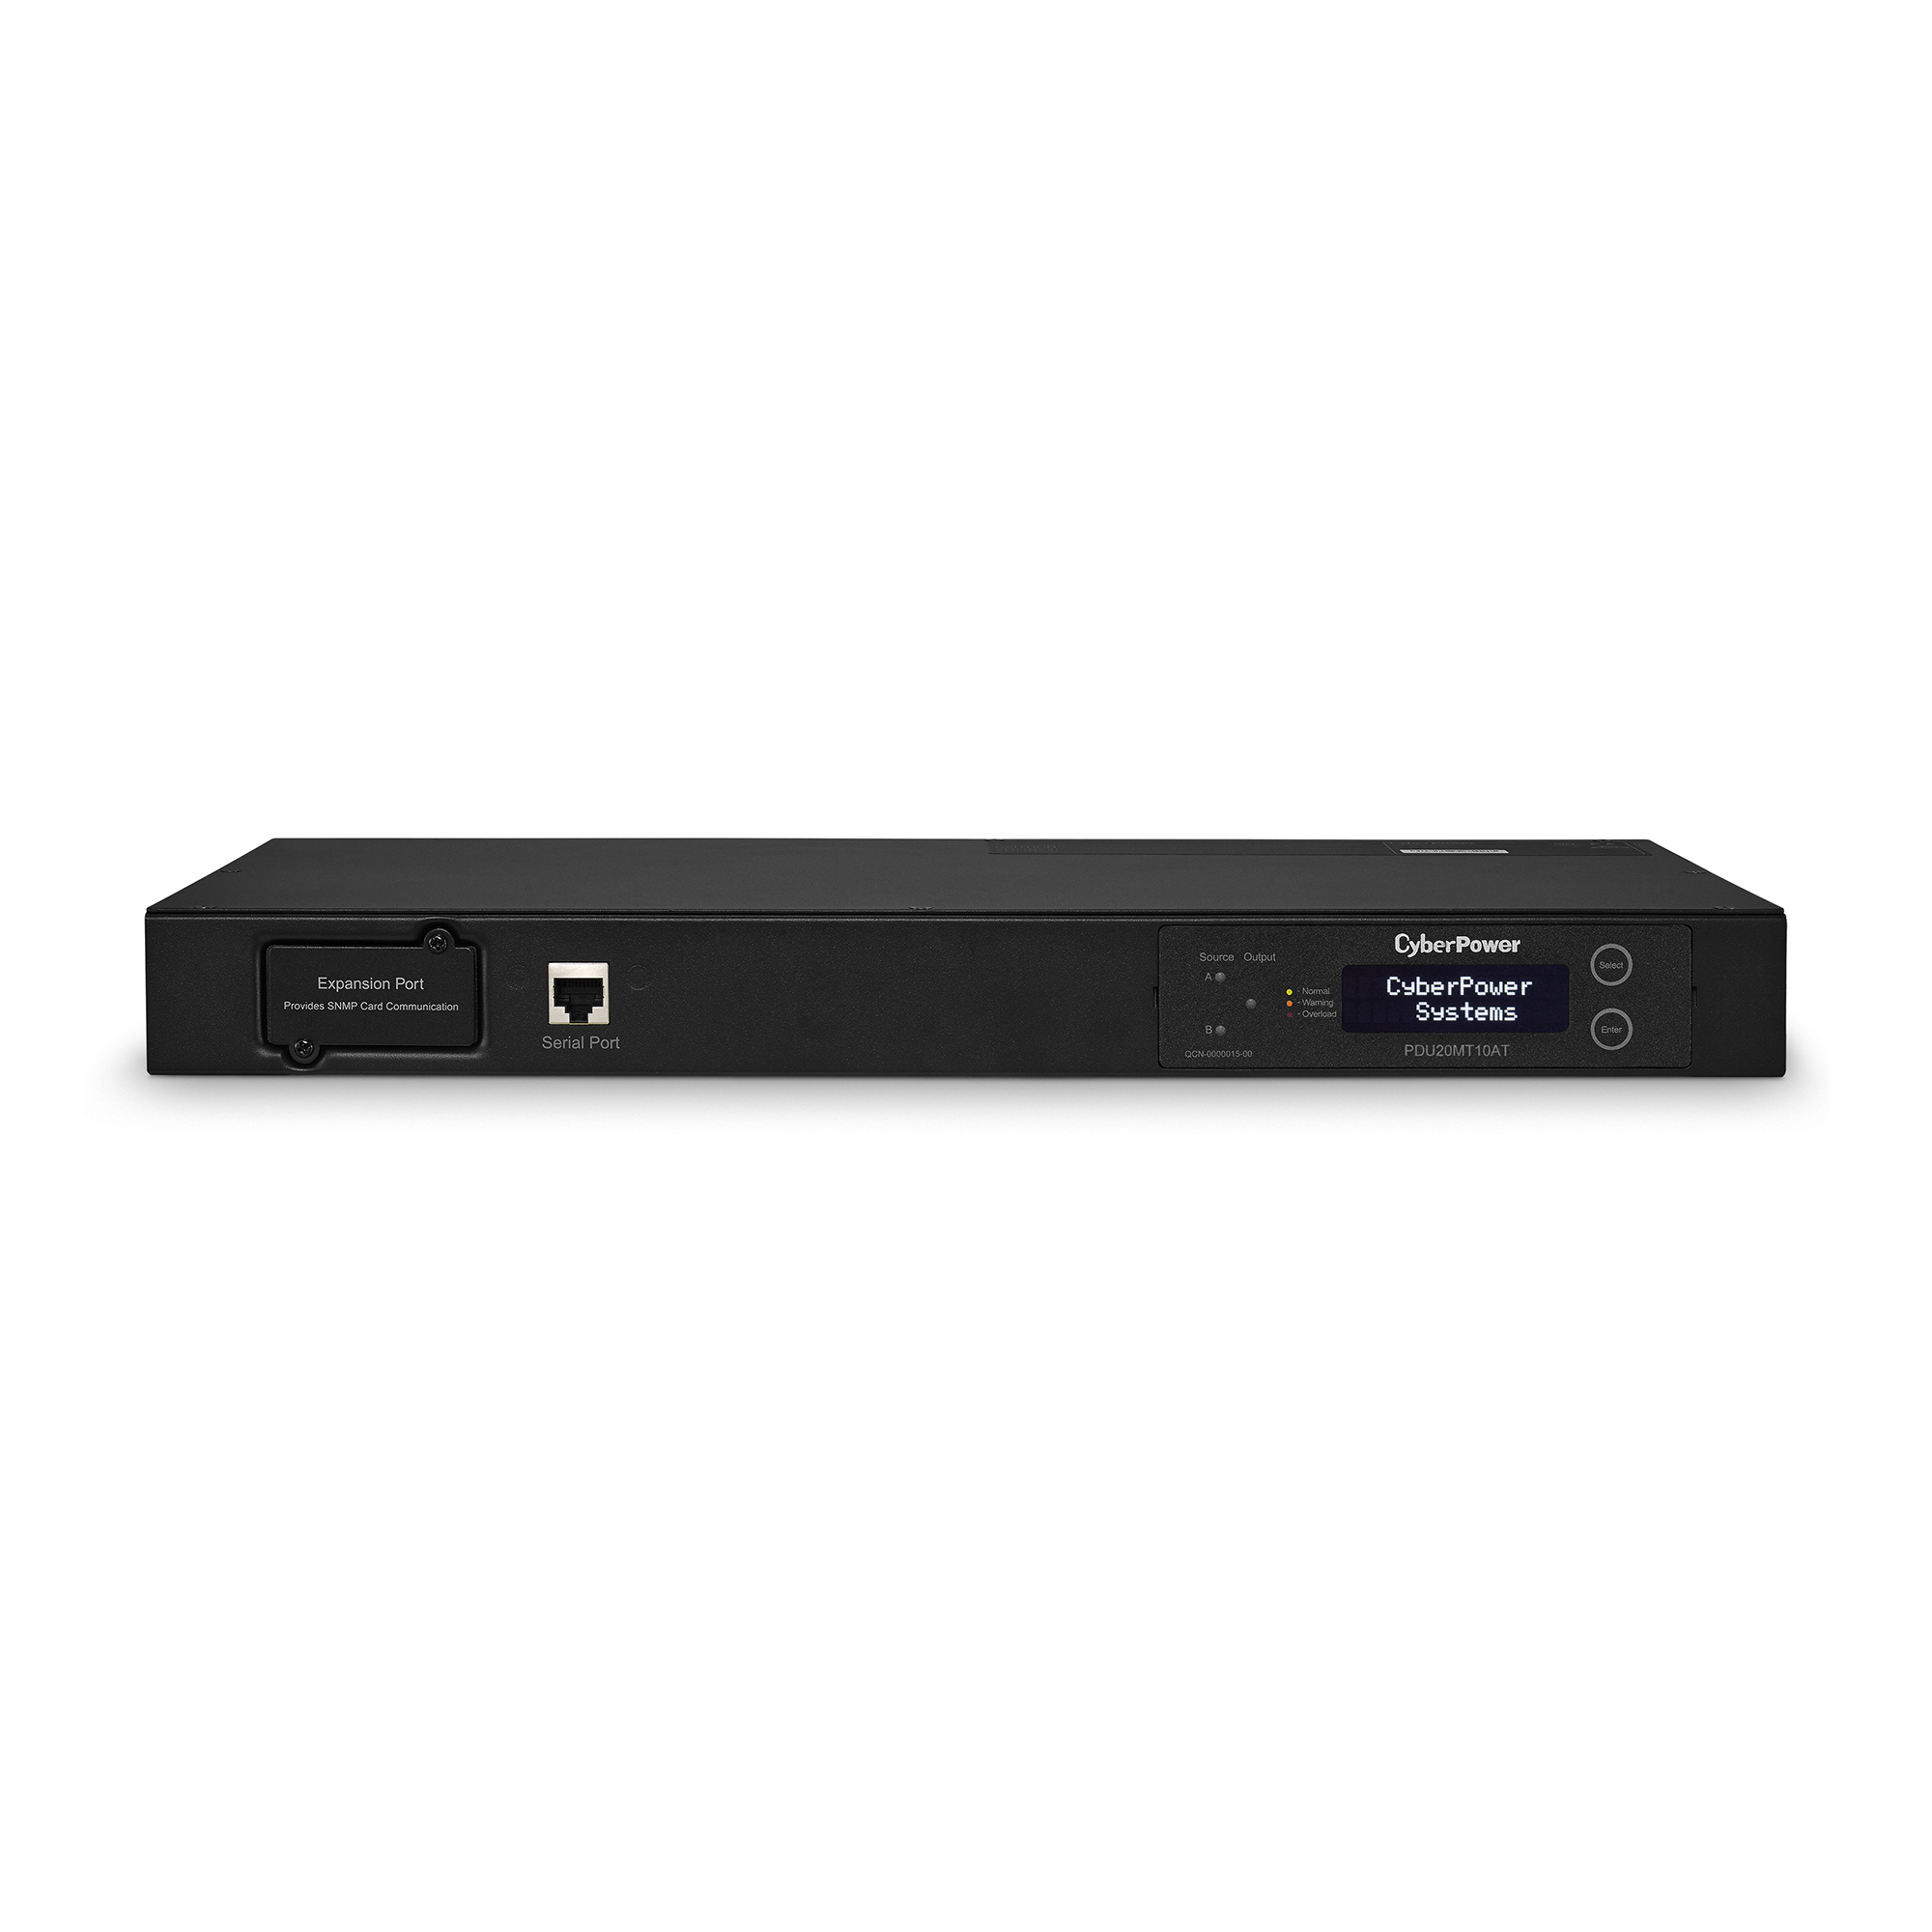 1U Rackmount 10 Outlets CyberPower PDU20MT10AT Metered ATS PDU 100-120V/20A 